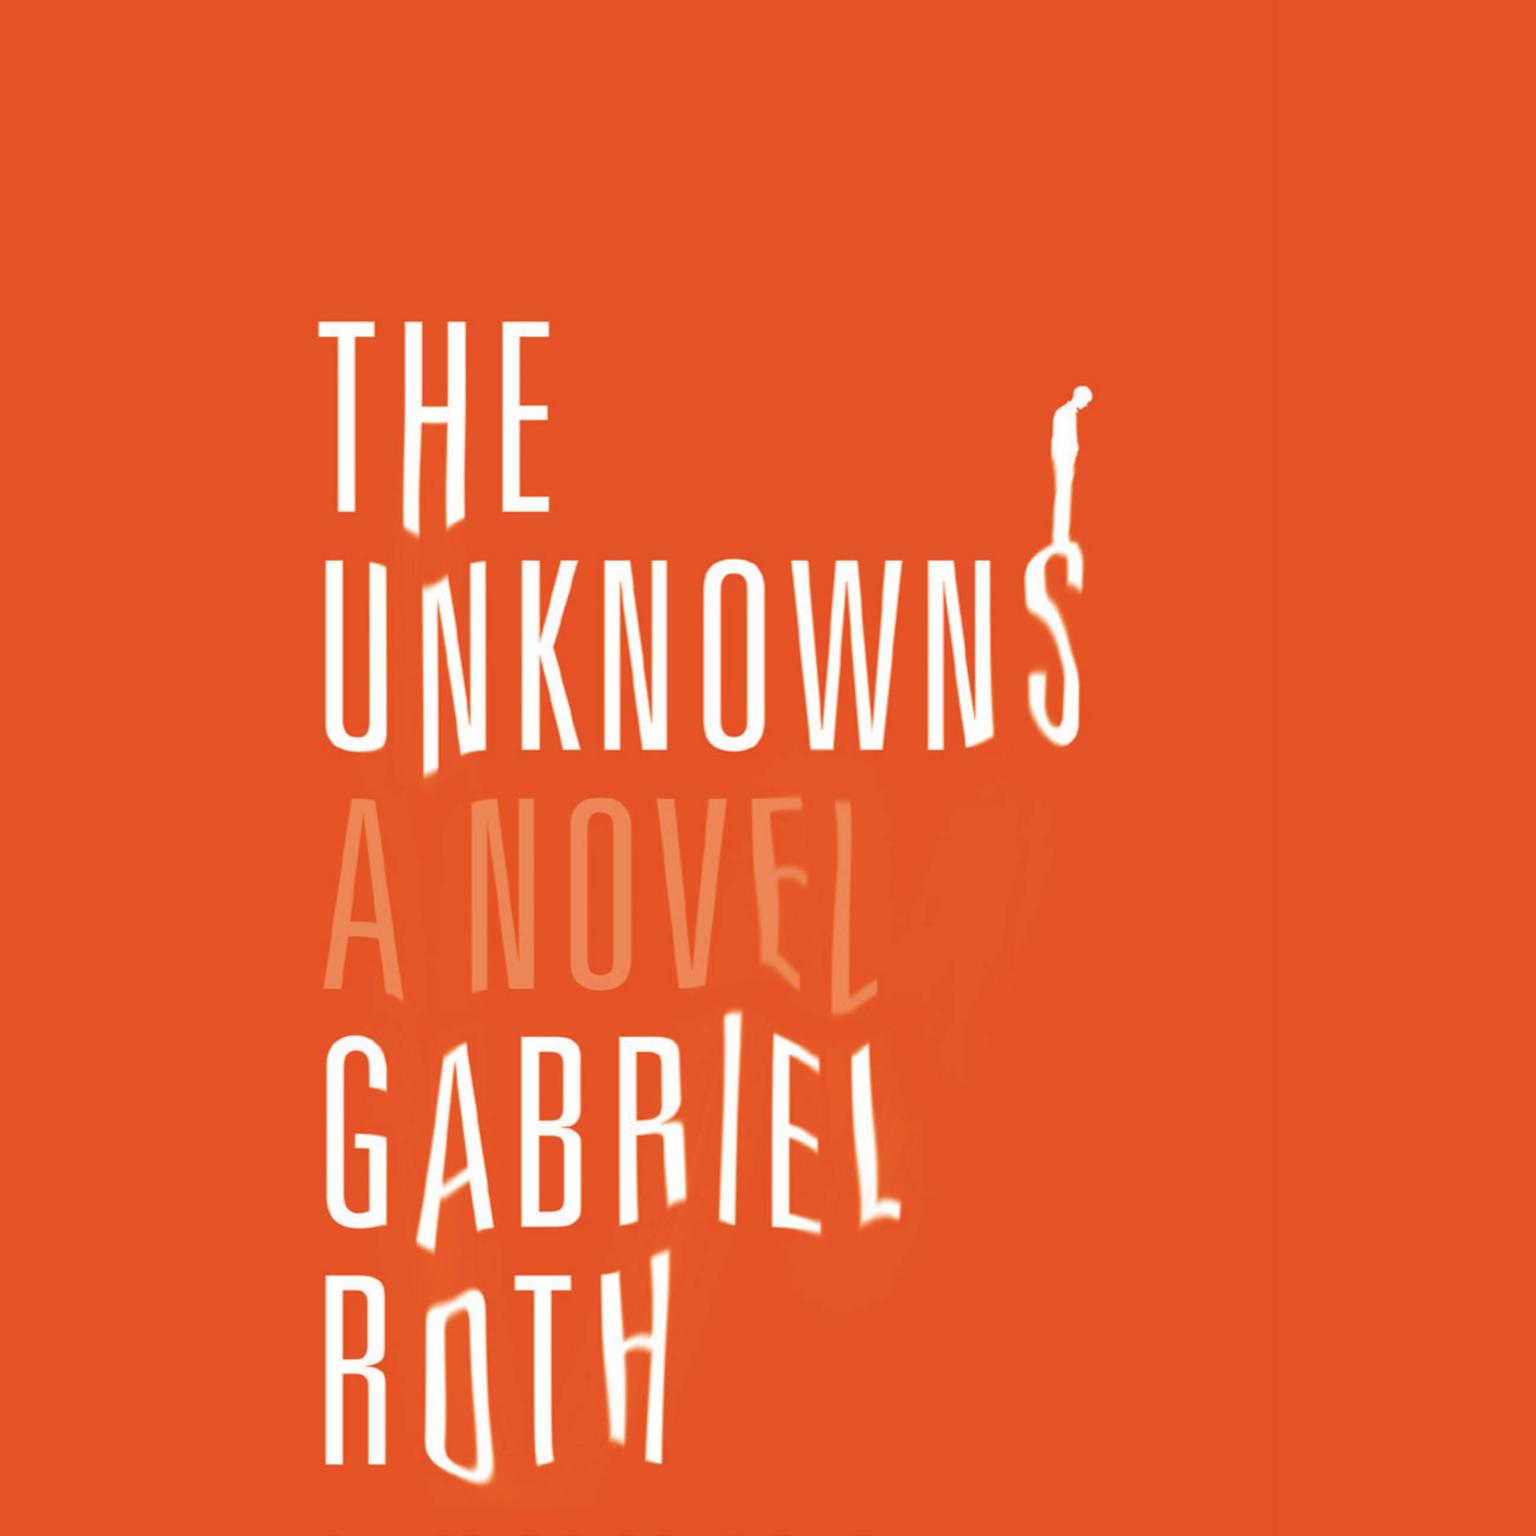 The Unknowns: A Novel Audiobook, by Gabriel Roth